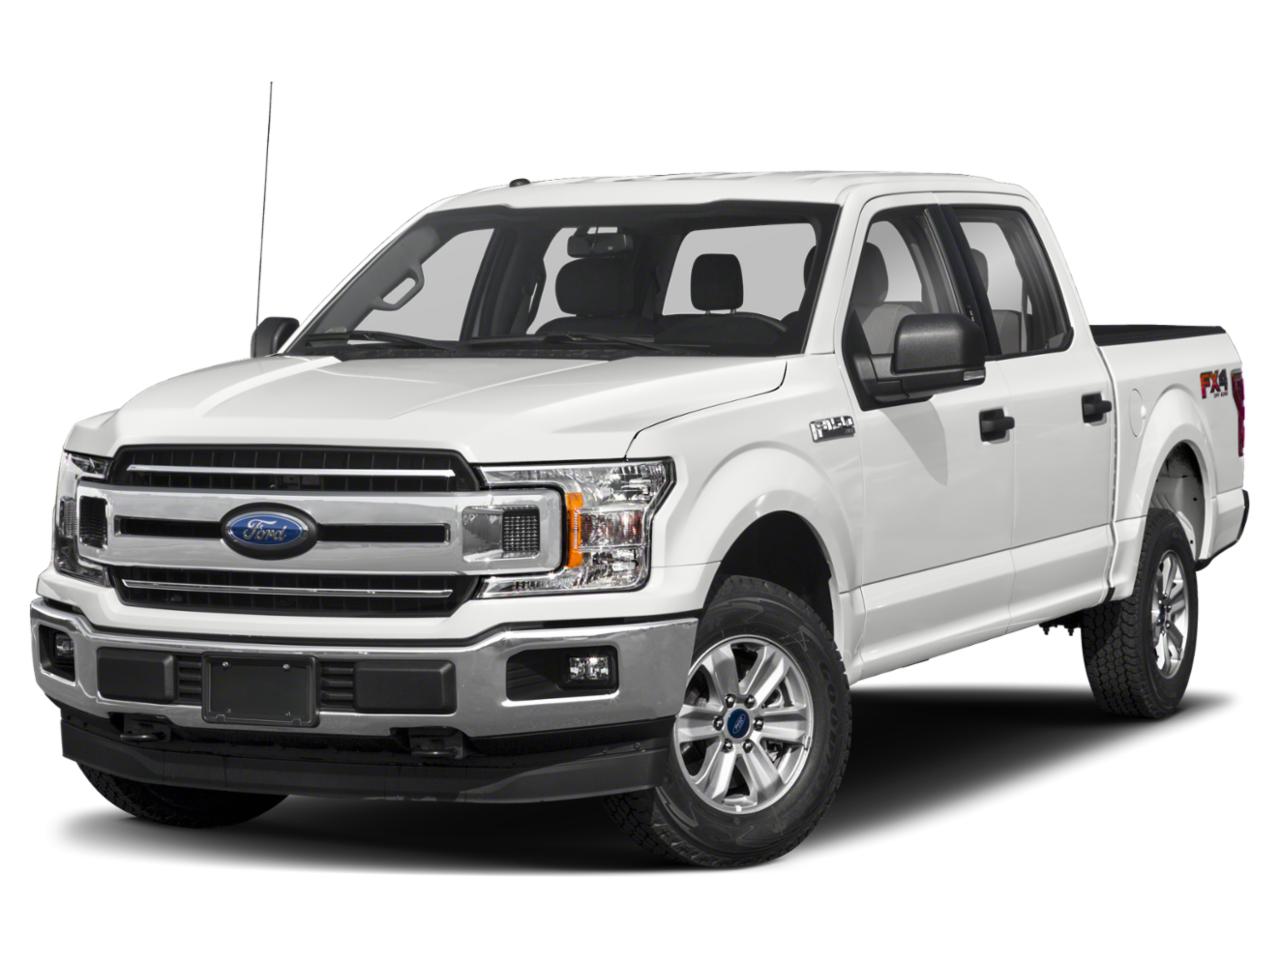 2020 Ford F-150 Vehicle Photo in Odessa, TX 79762